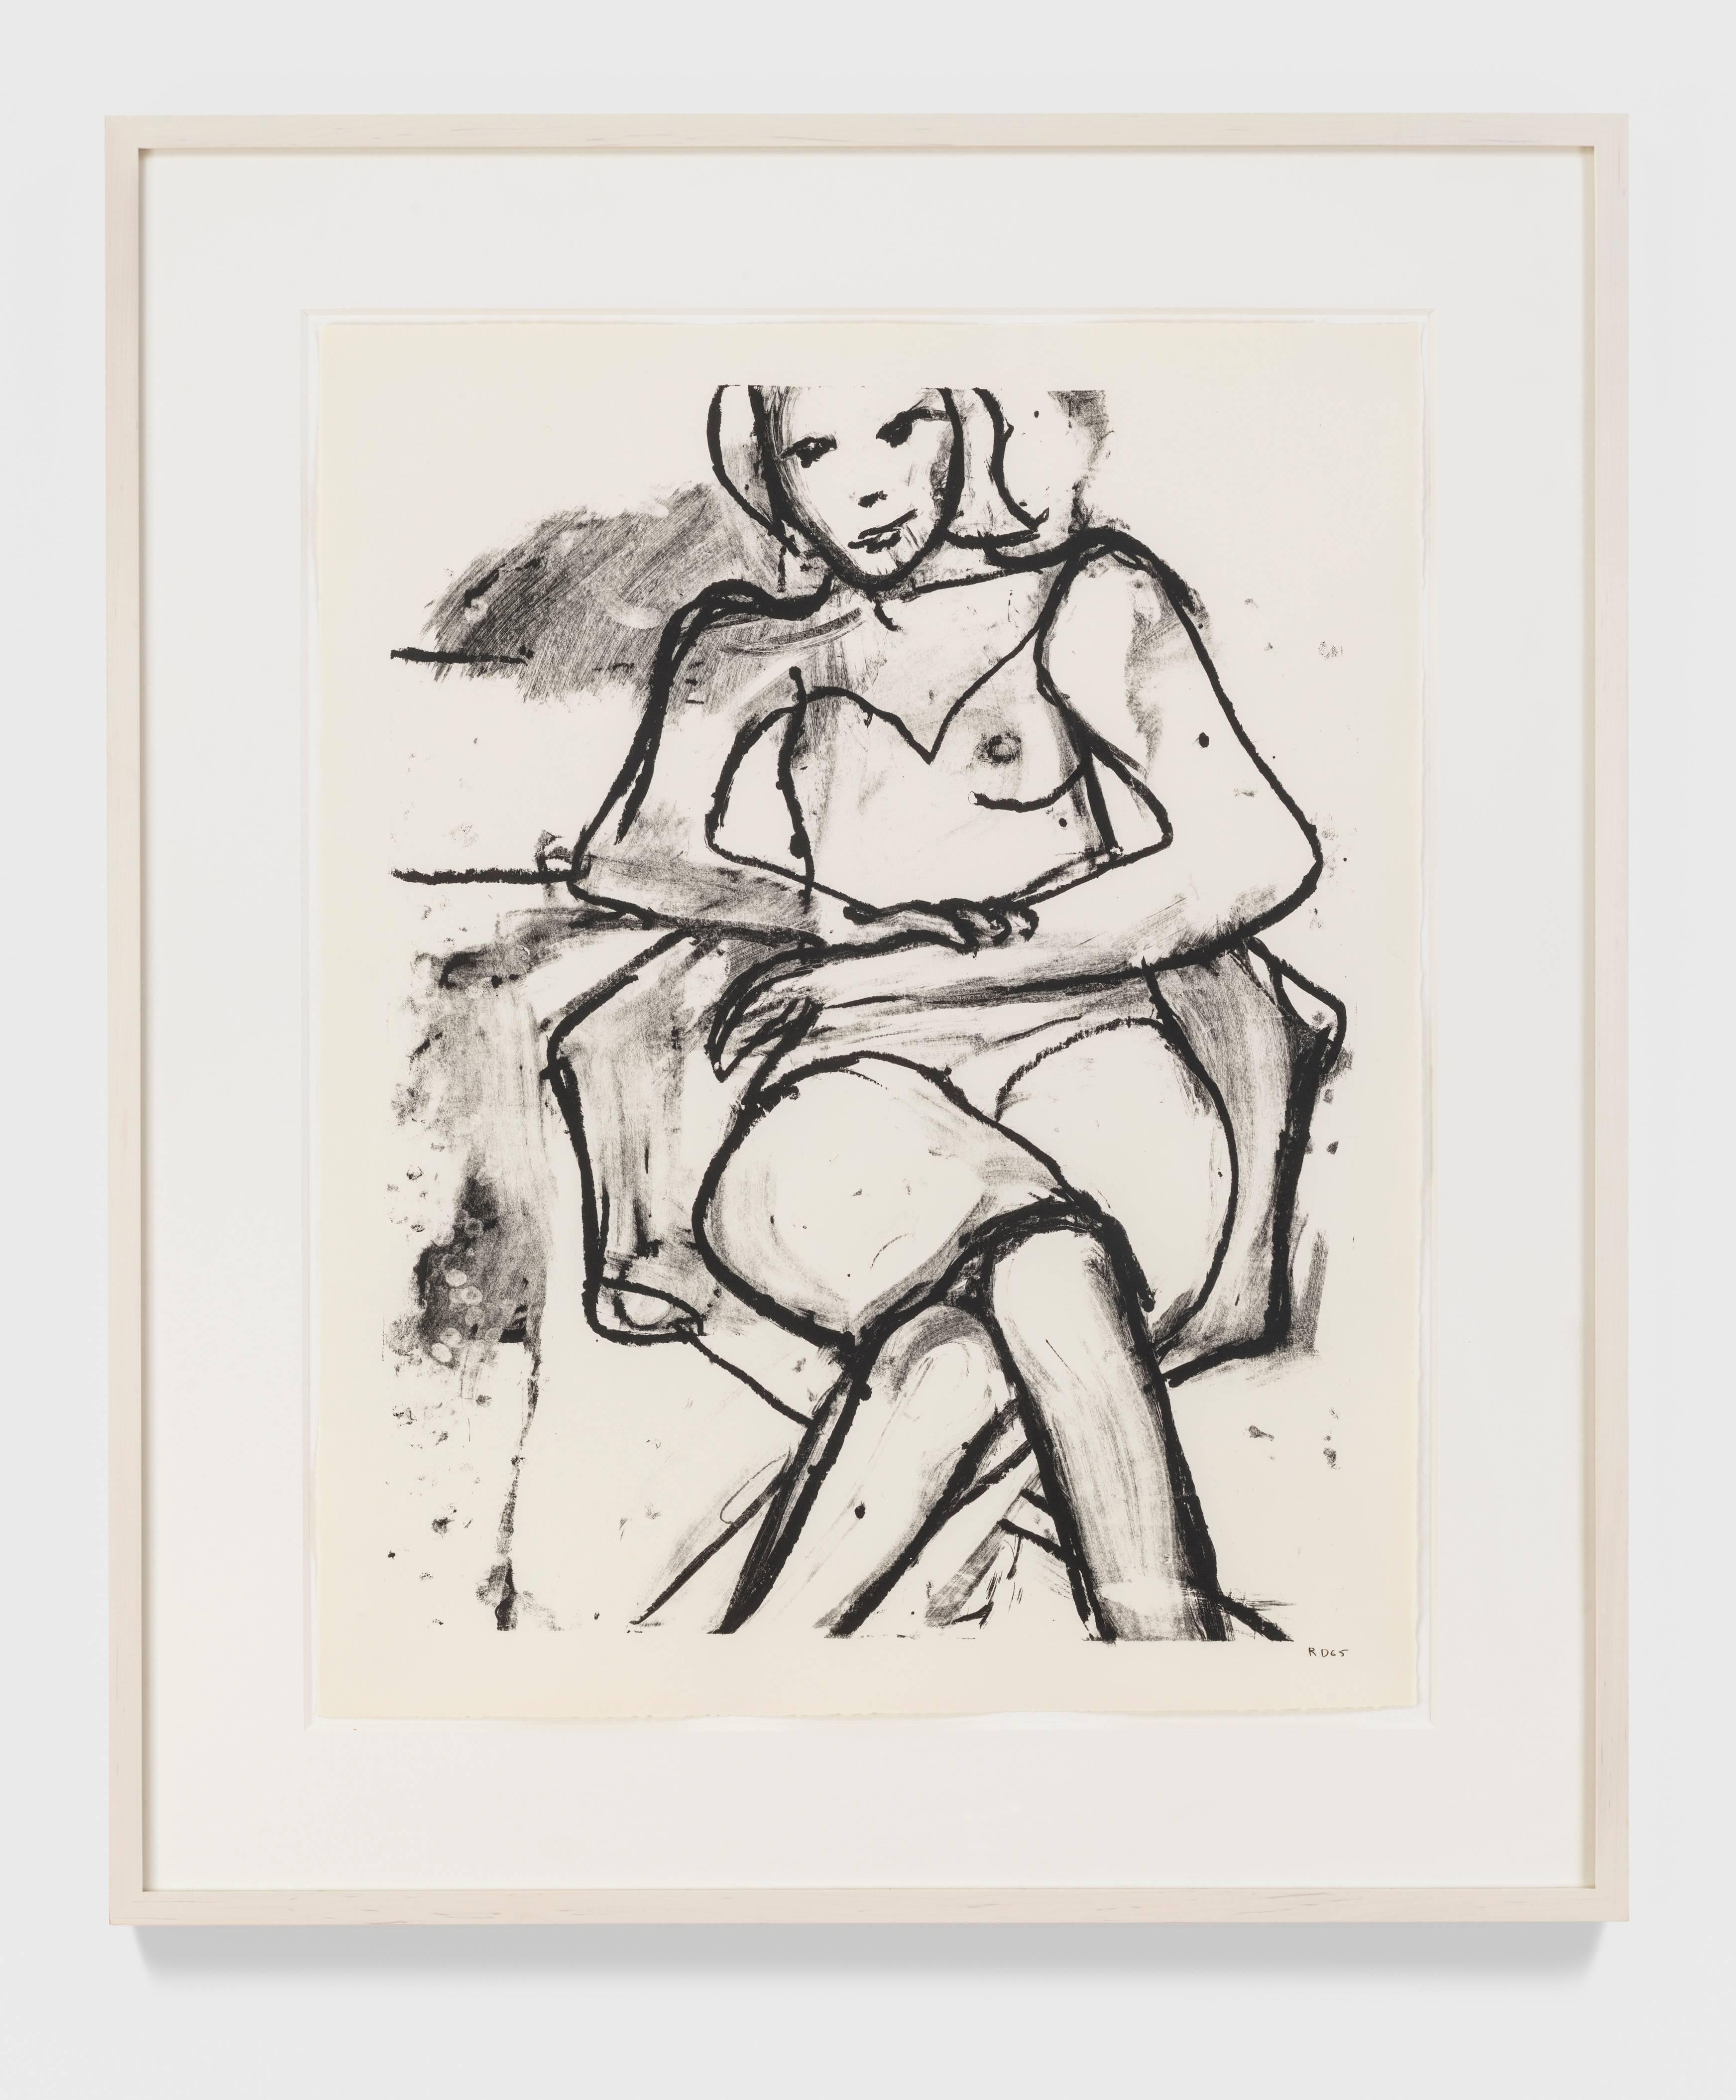 Seated Woman with Hands Crossed - Print by Richard Diebenkorn